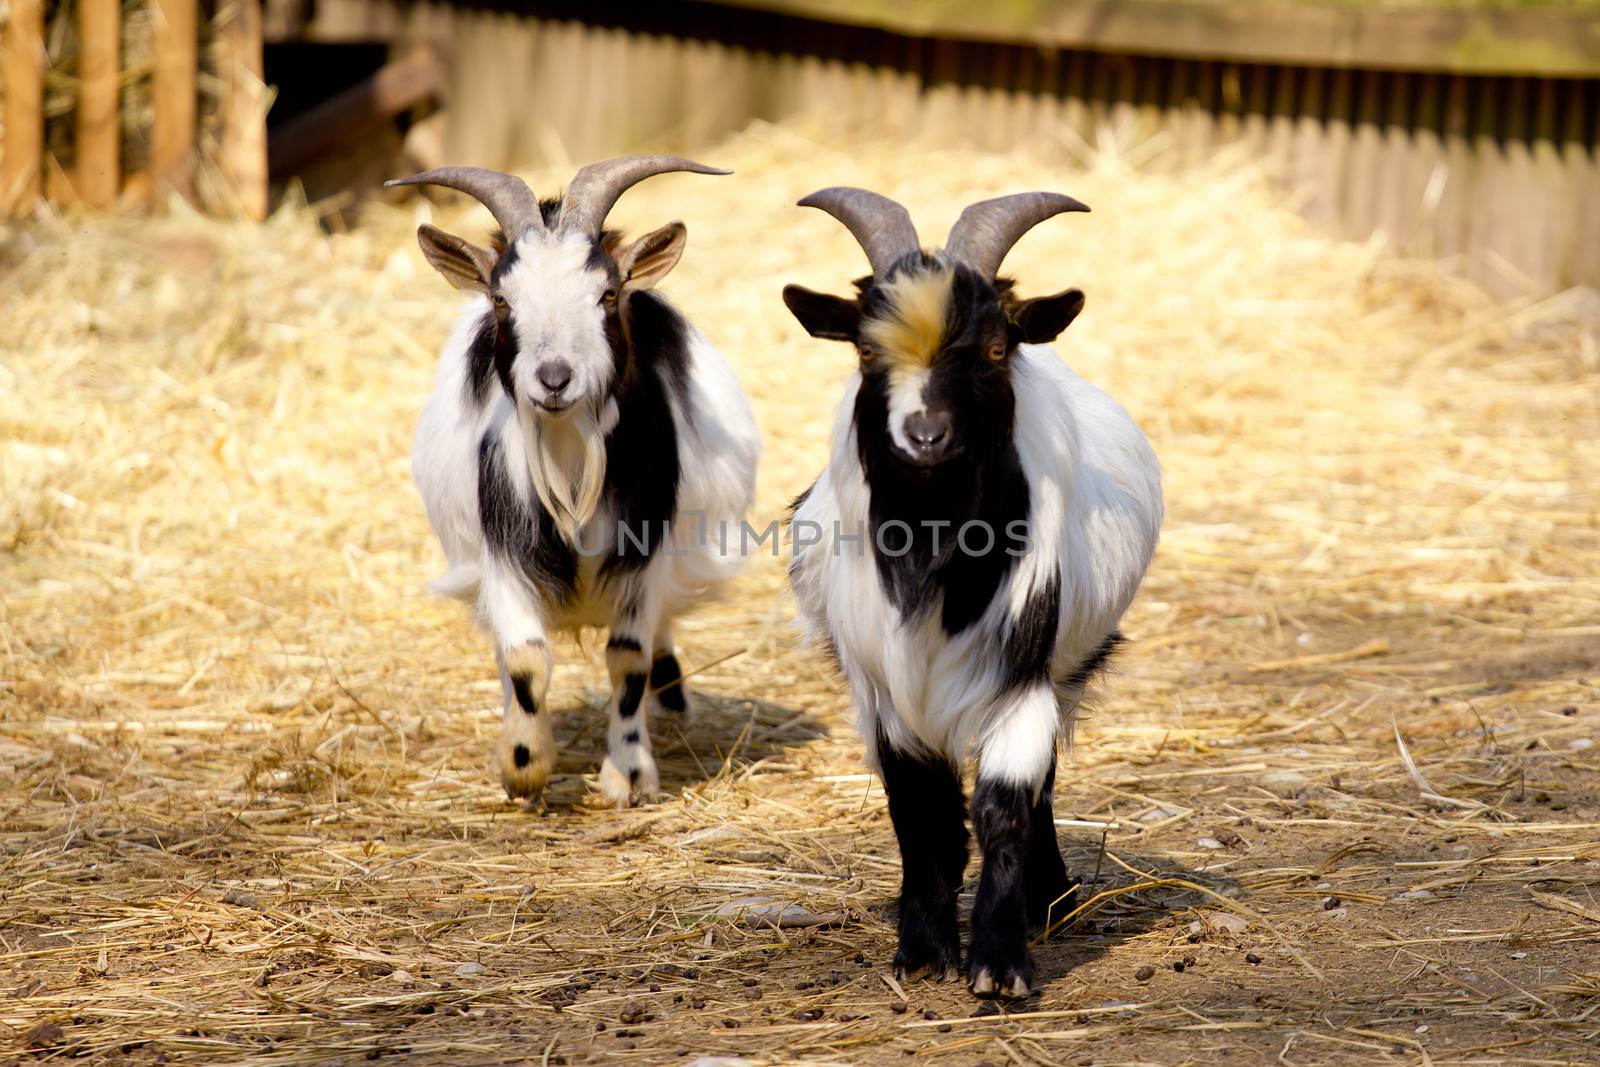 Domestic goats by gwolters